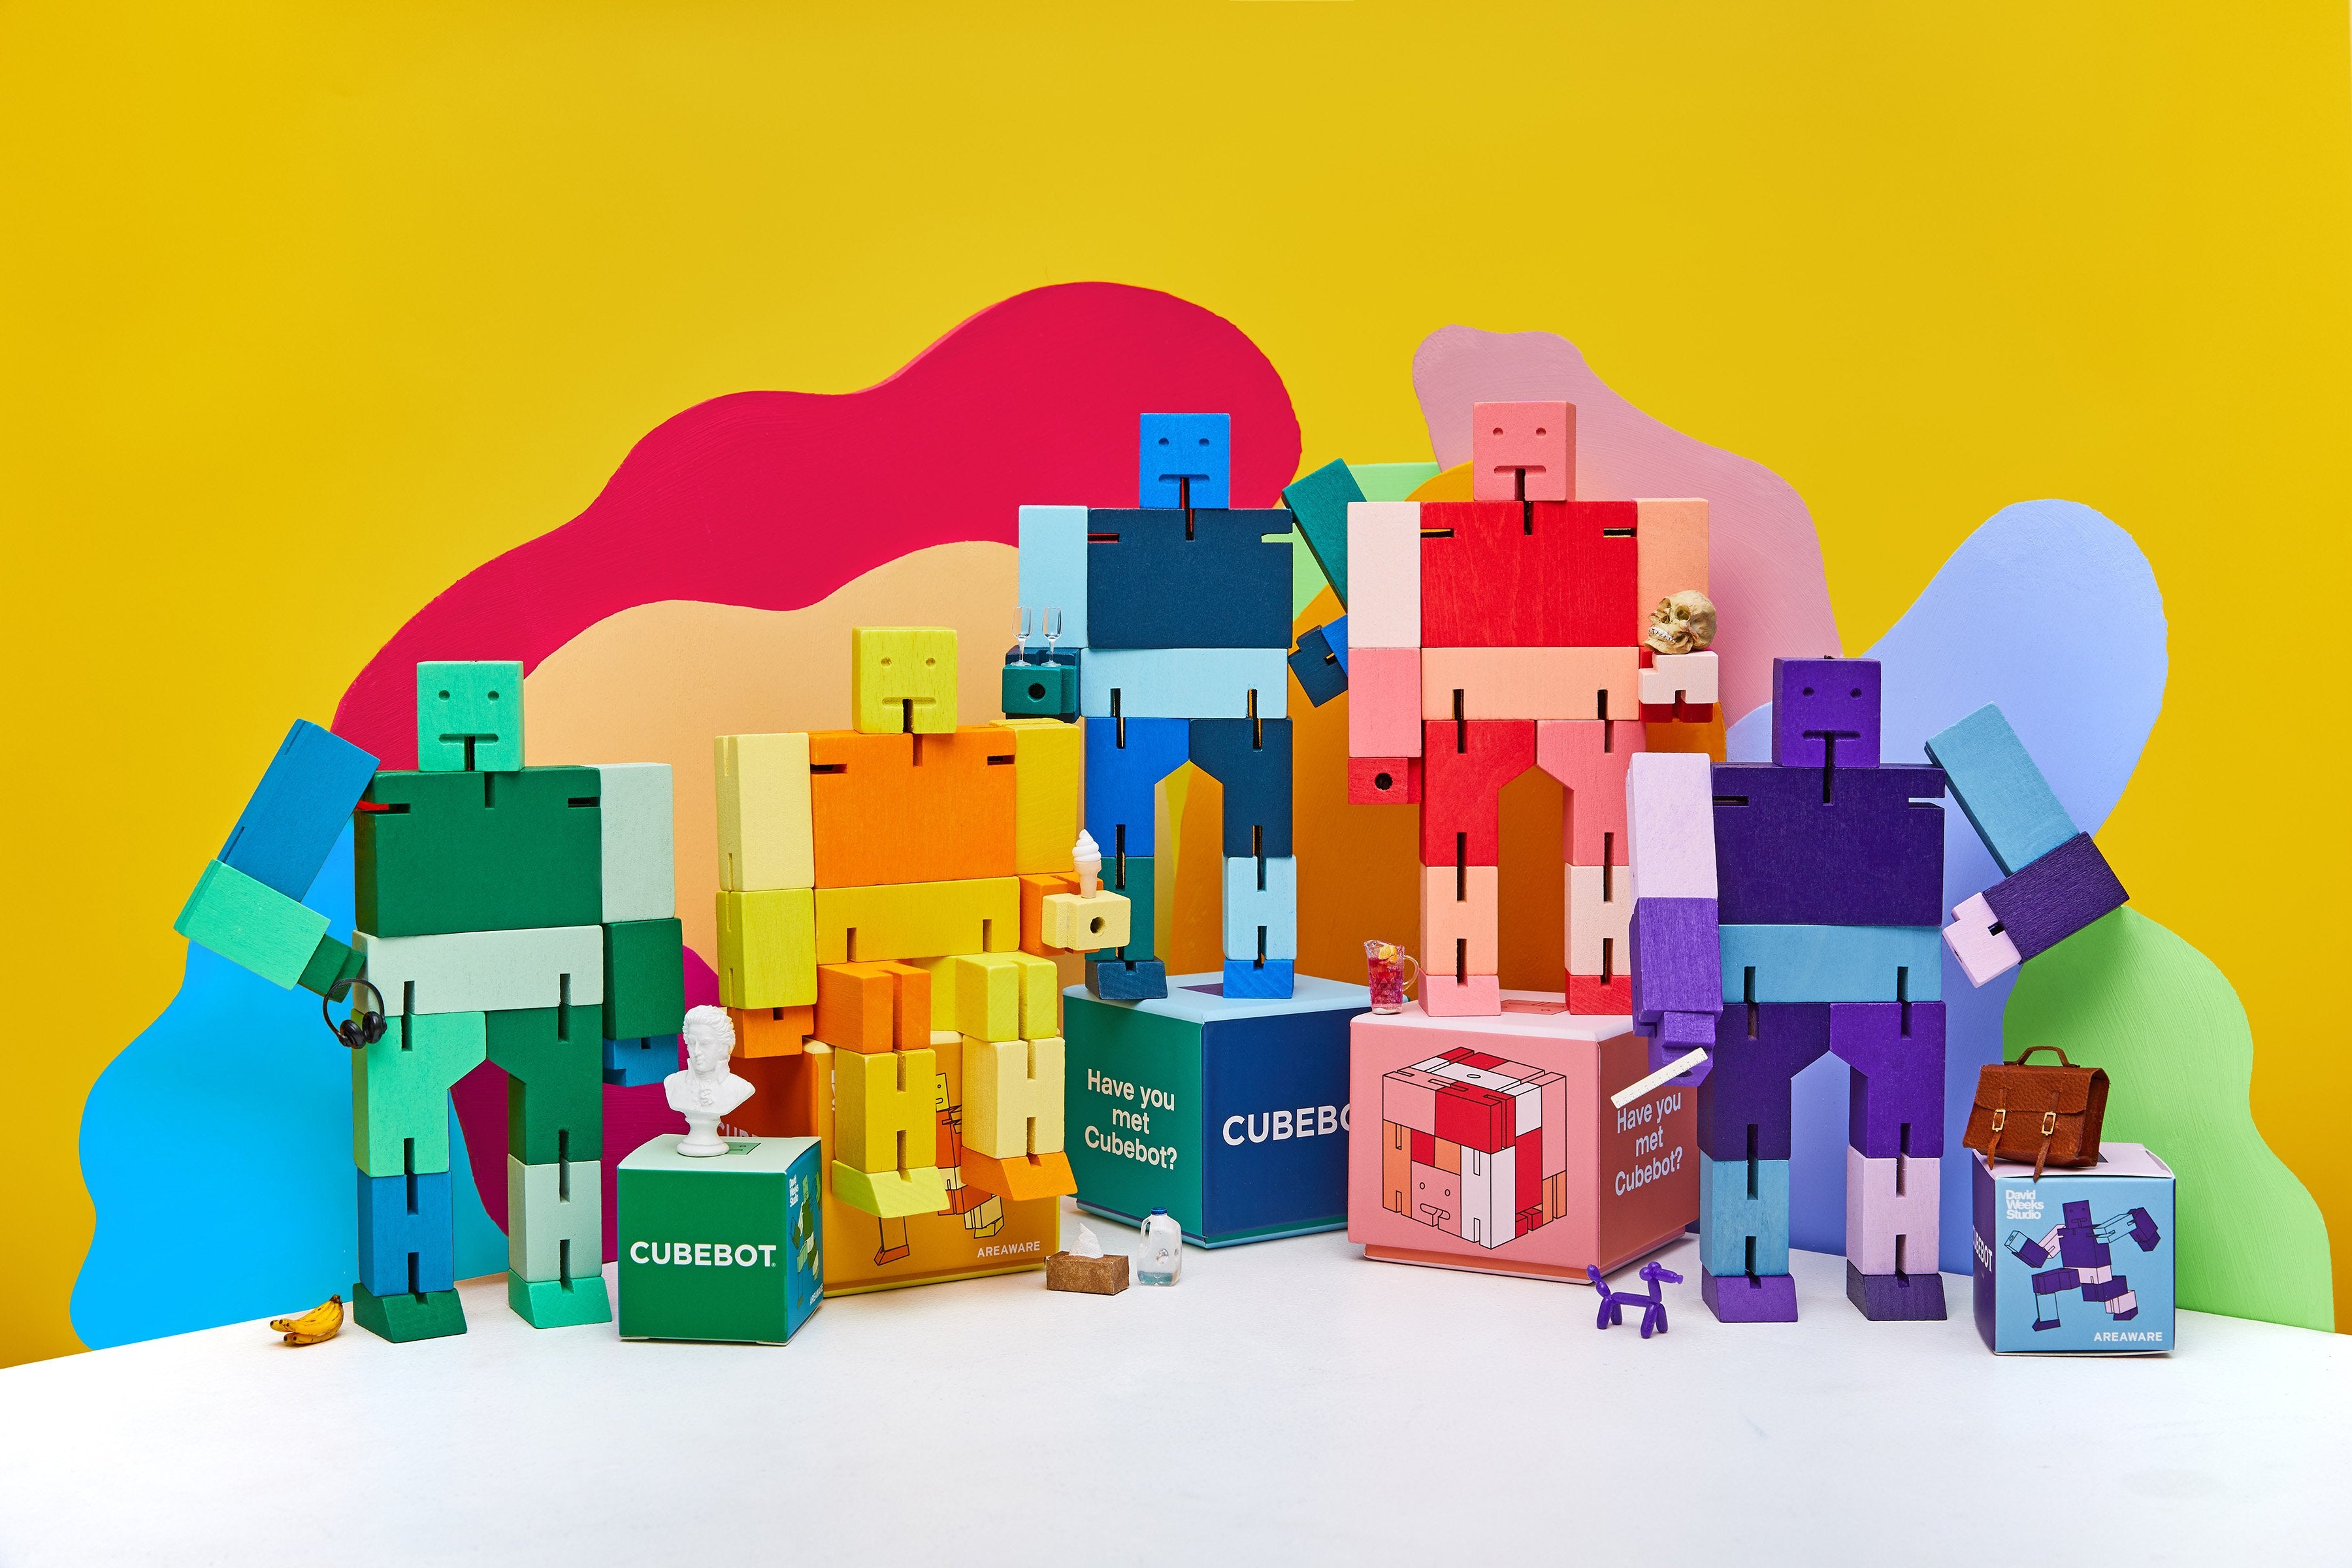 Collection of Areaware Cubebots in a mix of bright colors